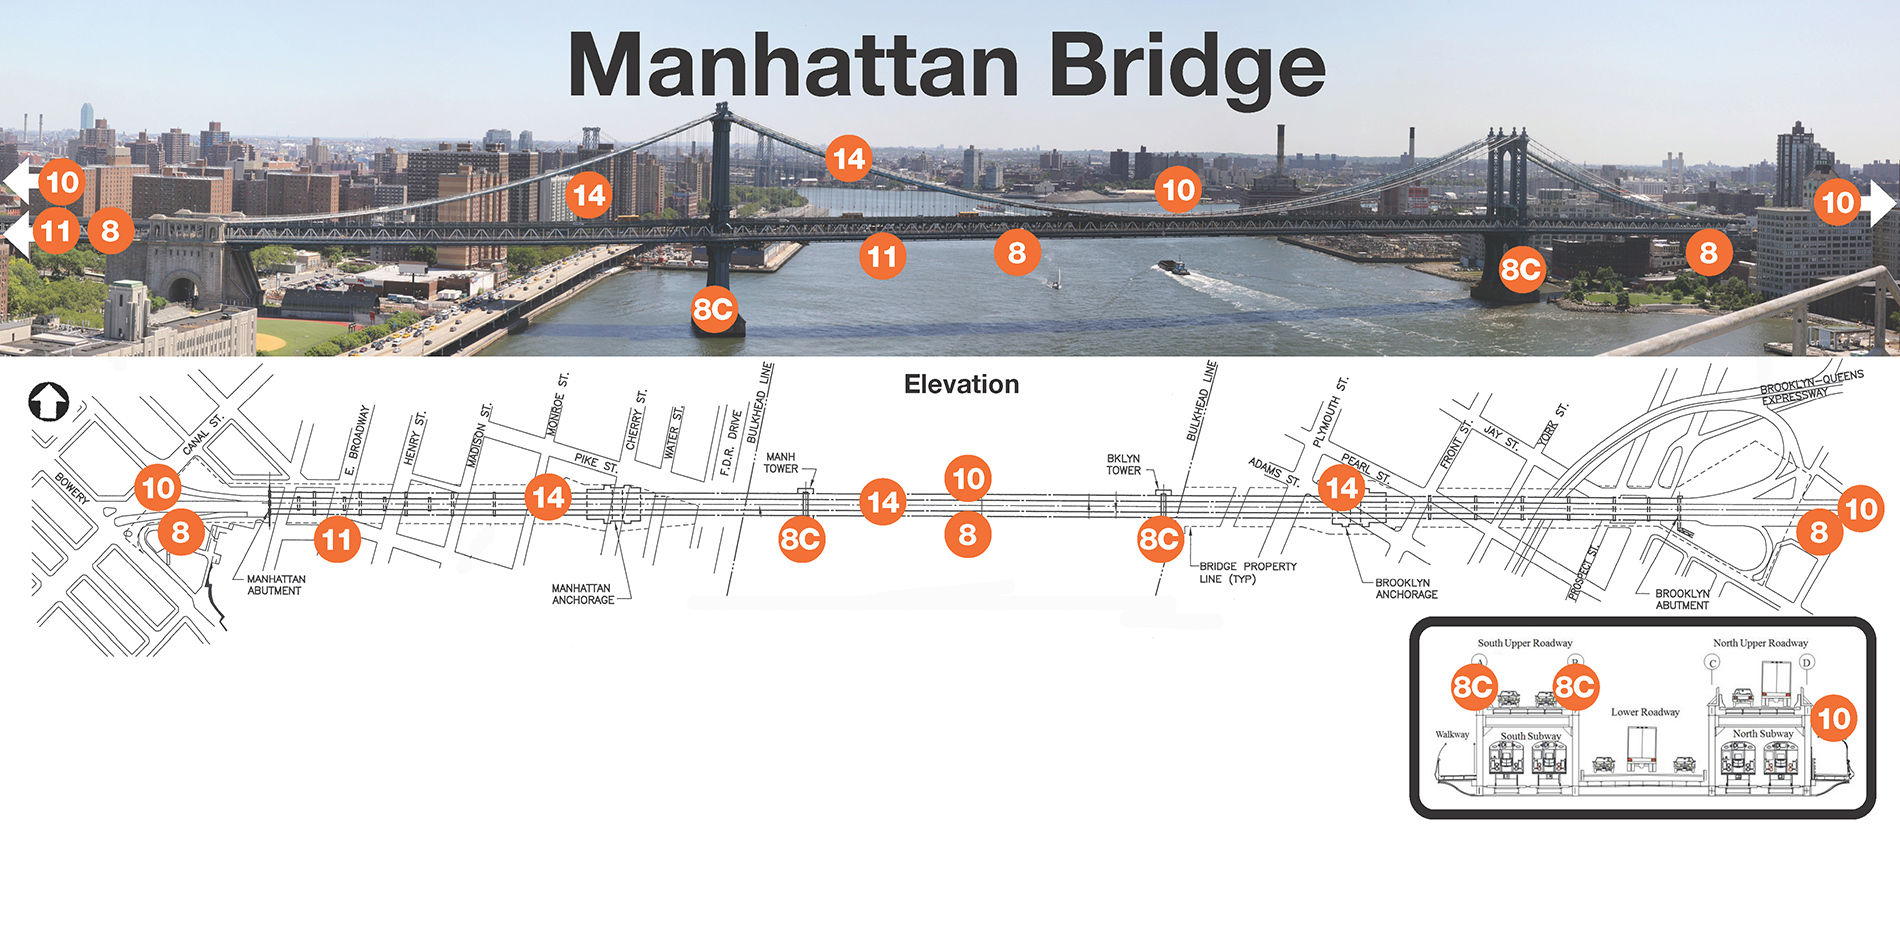 Picture and diagram of the Manhattan Bridge with labels to highlight where on the bridge work has been done under previous contracts.